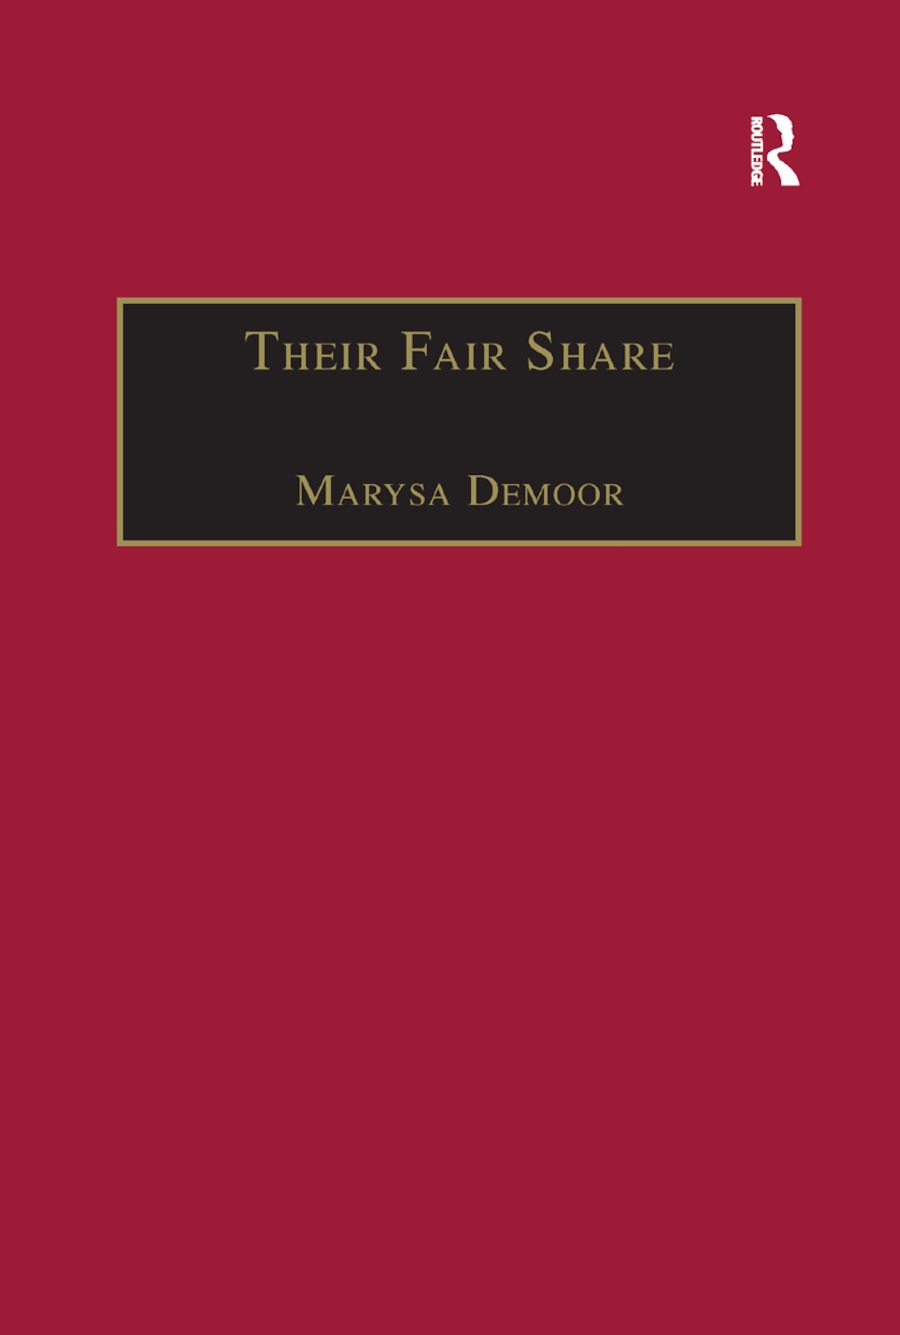 Their Fair Share: Women, Power and Criticism in the Athenaeum, from Millicent Garrett Fawcett to Katherine Mansfield, 1870�1920